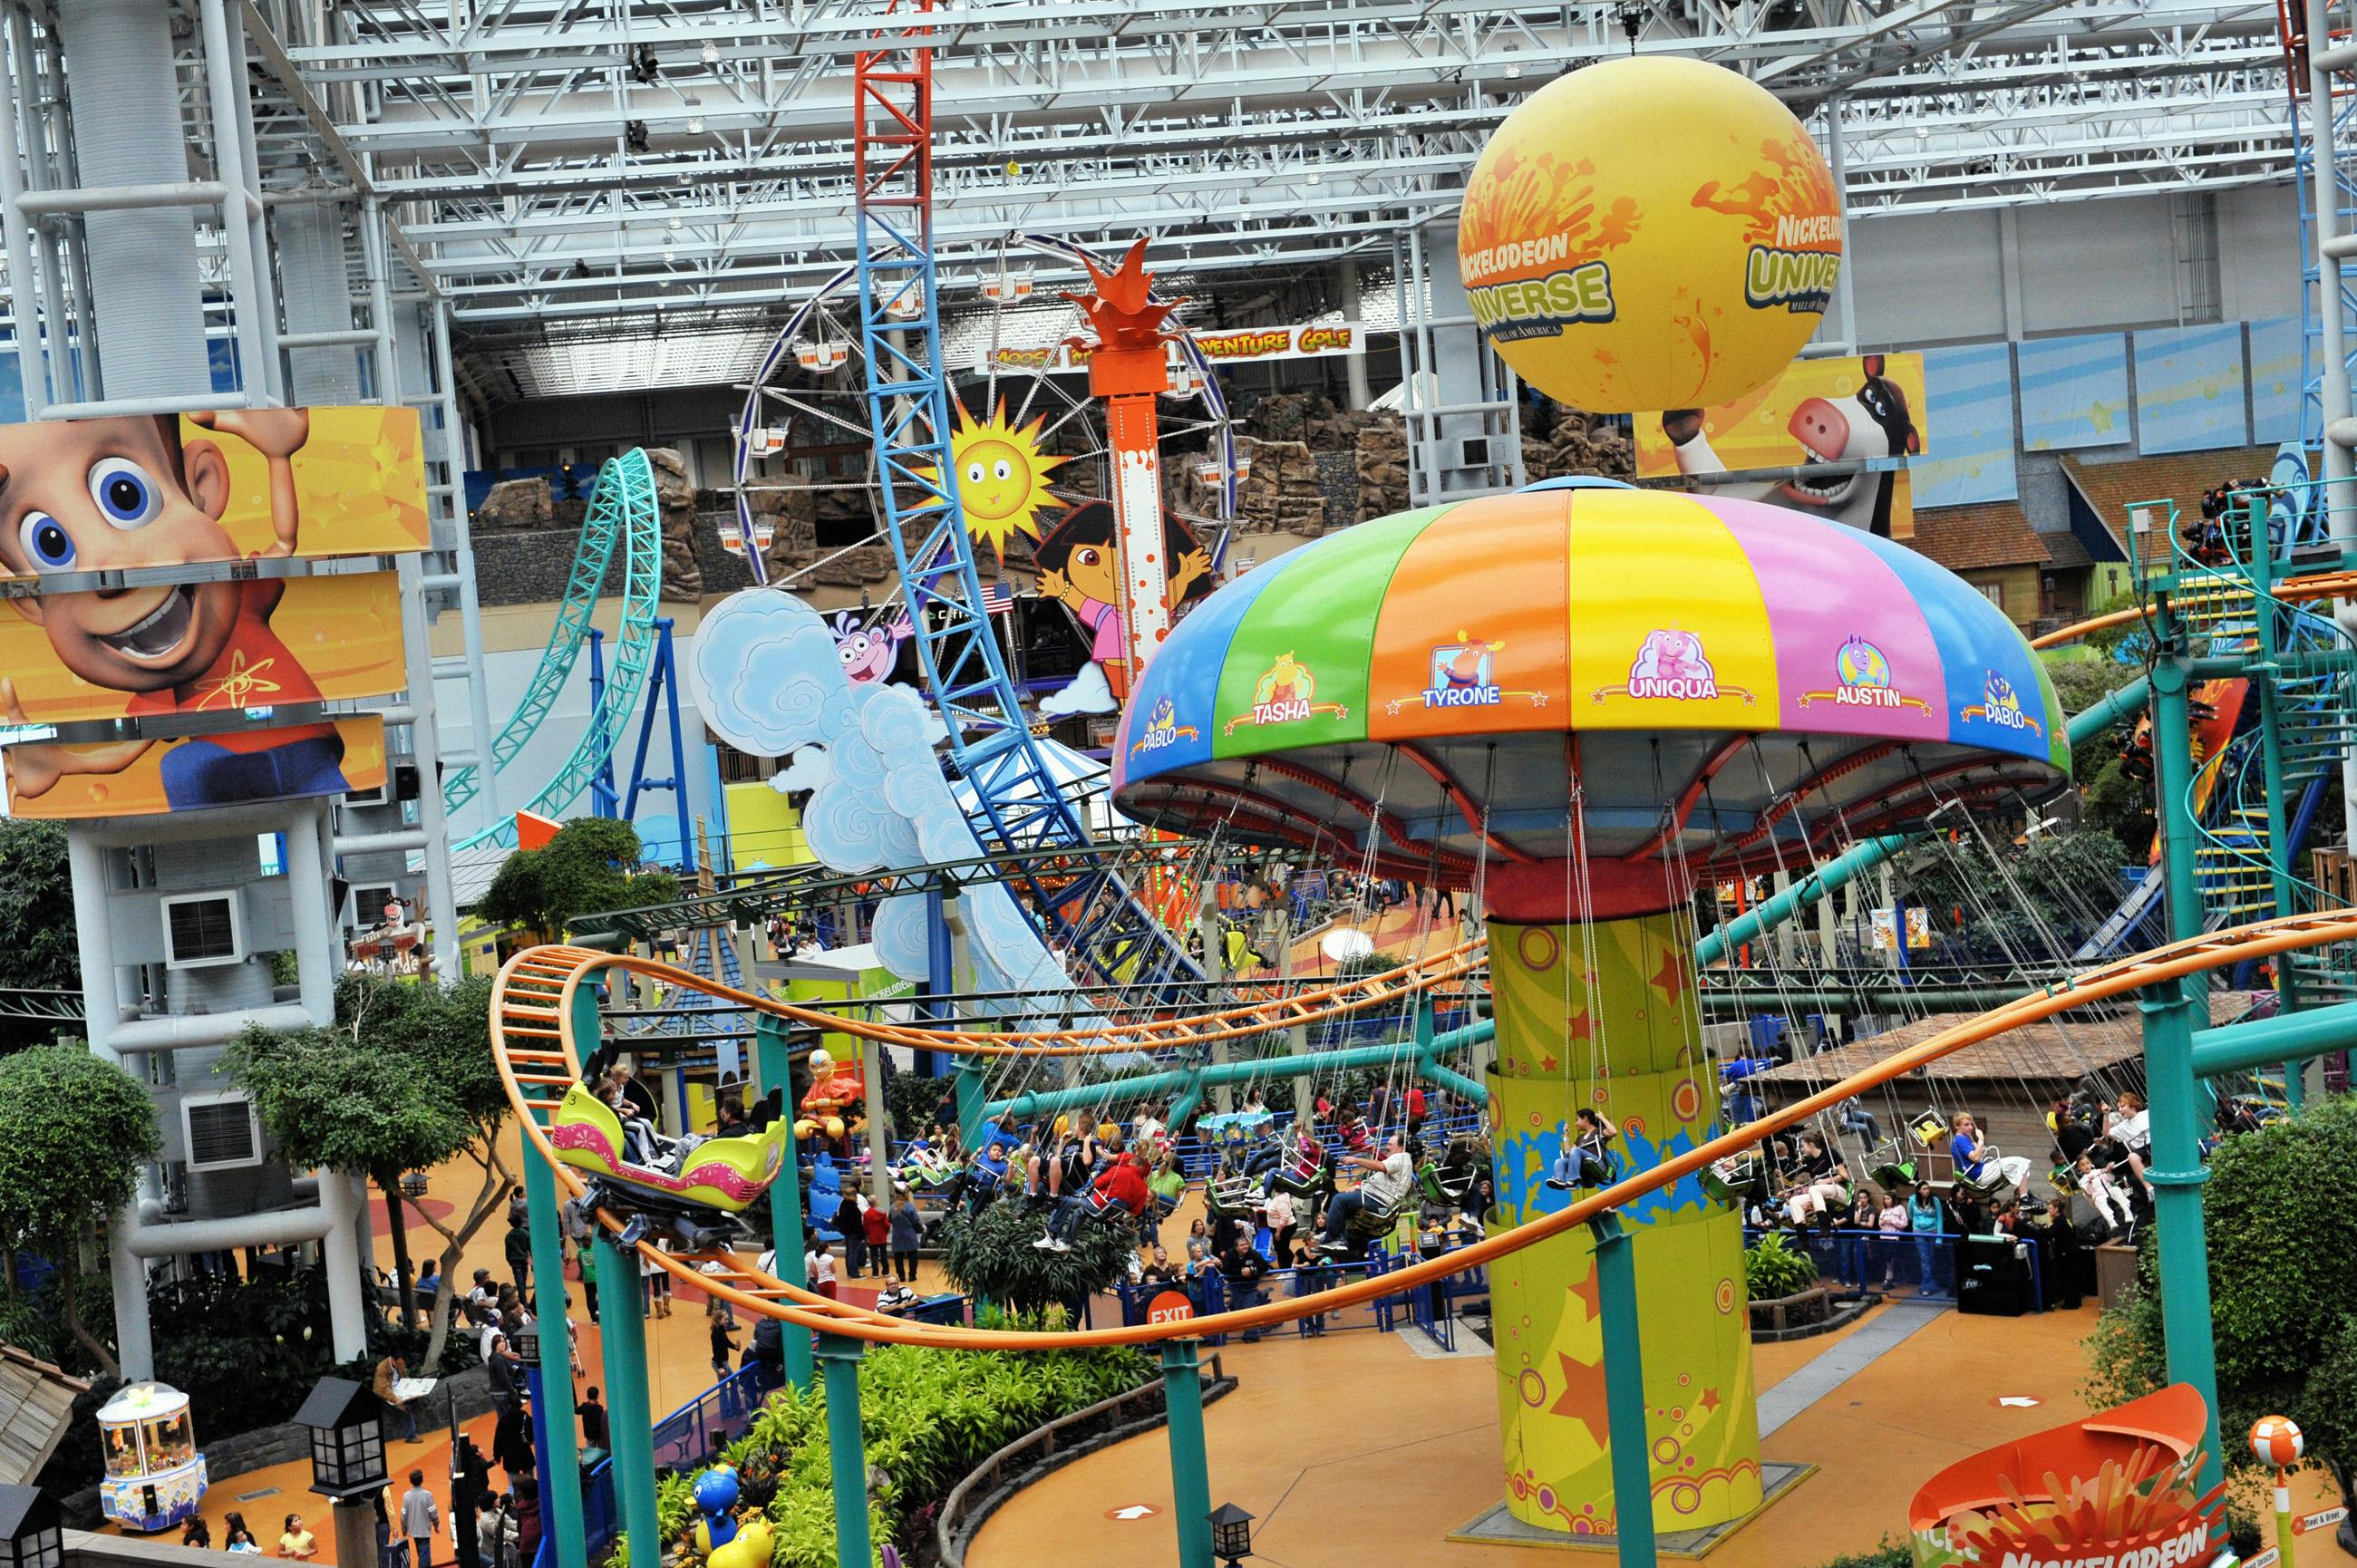 Why was the Mall of America built in Minnesota?